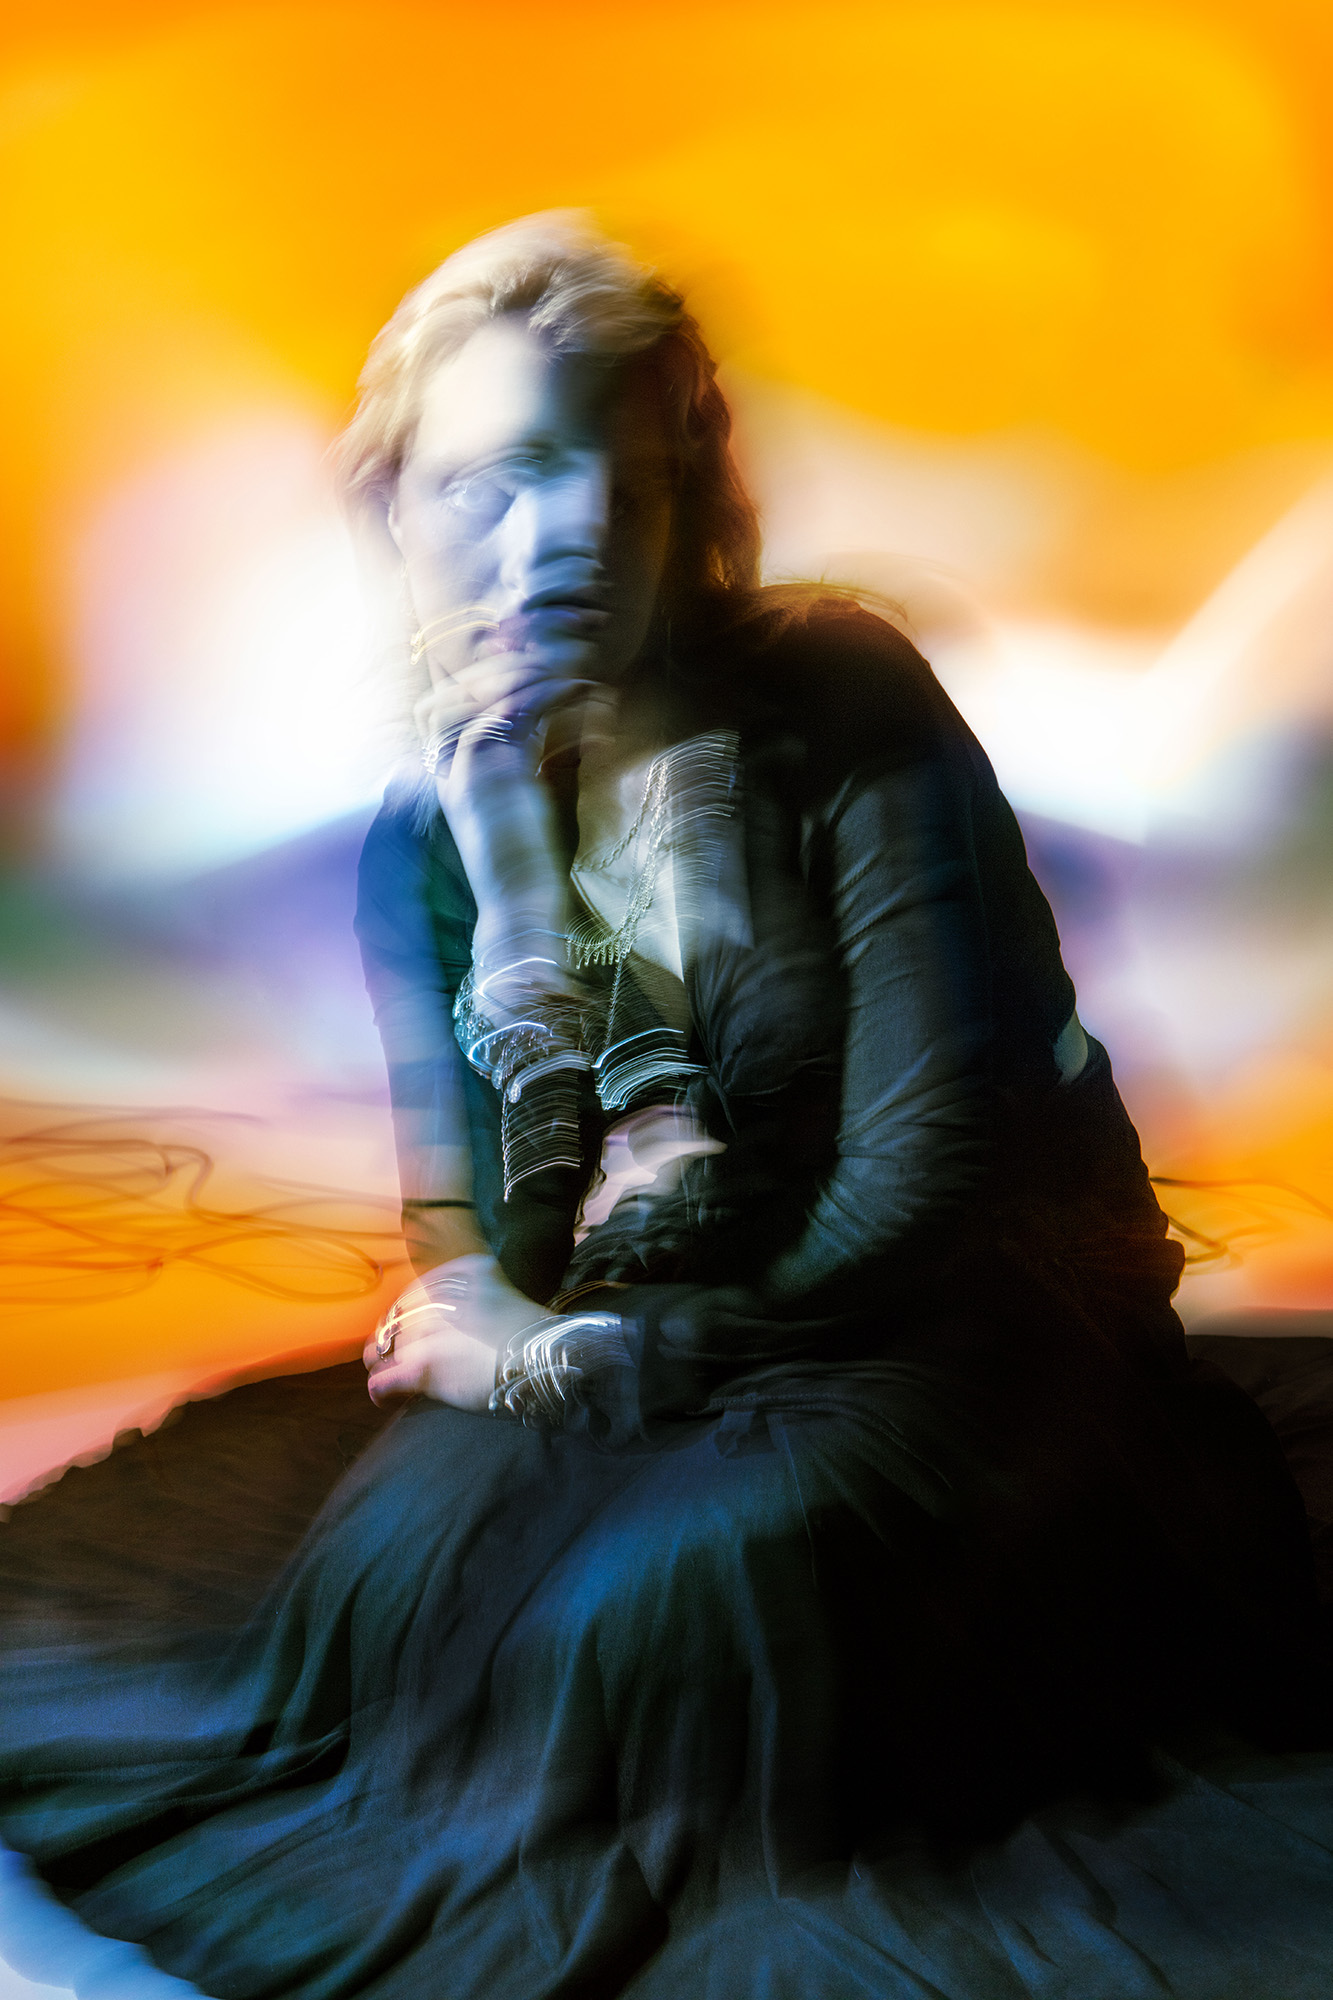 Photography work by Ruby Williams showing a blurred ethereal portrait